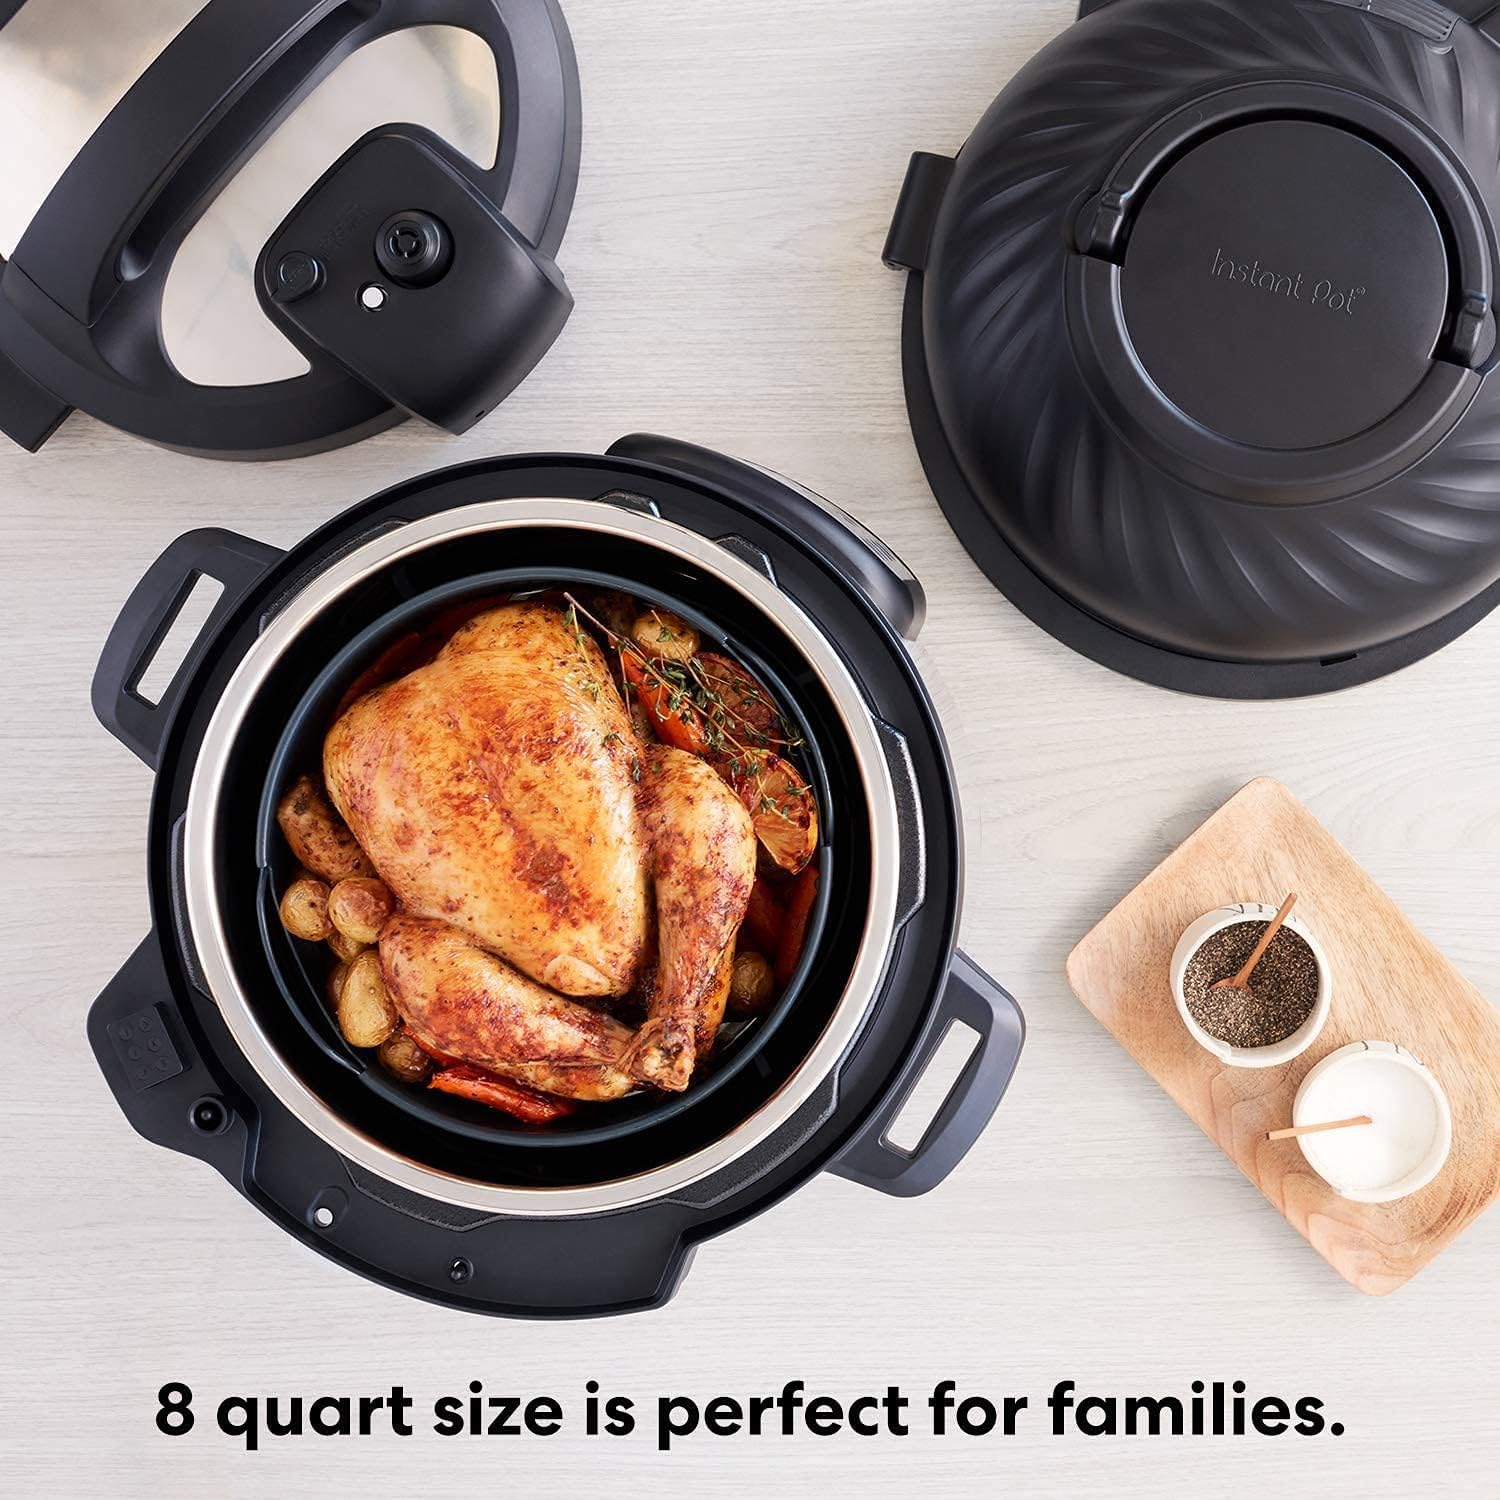 https://bigbigmart.com/wp-content/uploads/2023/07/Instant-Pot-Duo-Crisp-11-in-1-Air-Fryer-and-Electric-Pressure-Cooker-Combo-with-Multicooker-Lids-that-Air-Fries-Steams-Slow-Cooks-Sautes-Dehydrates-and-More-Free-App-With-1900-Recipes-6-Quart5.jpg